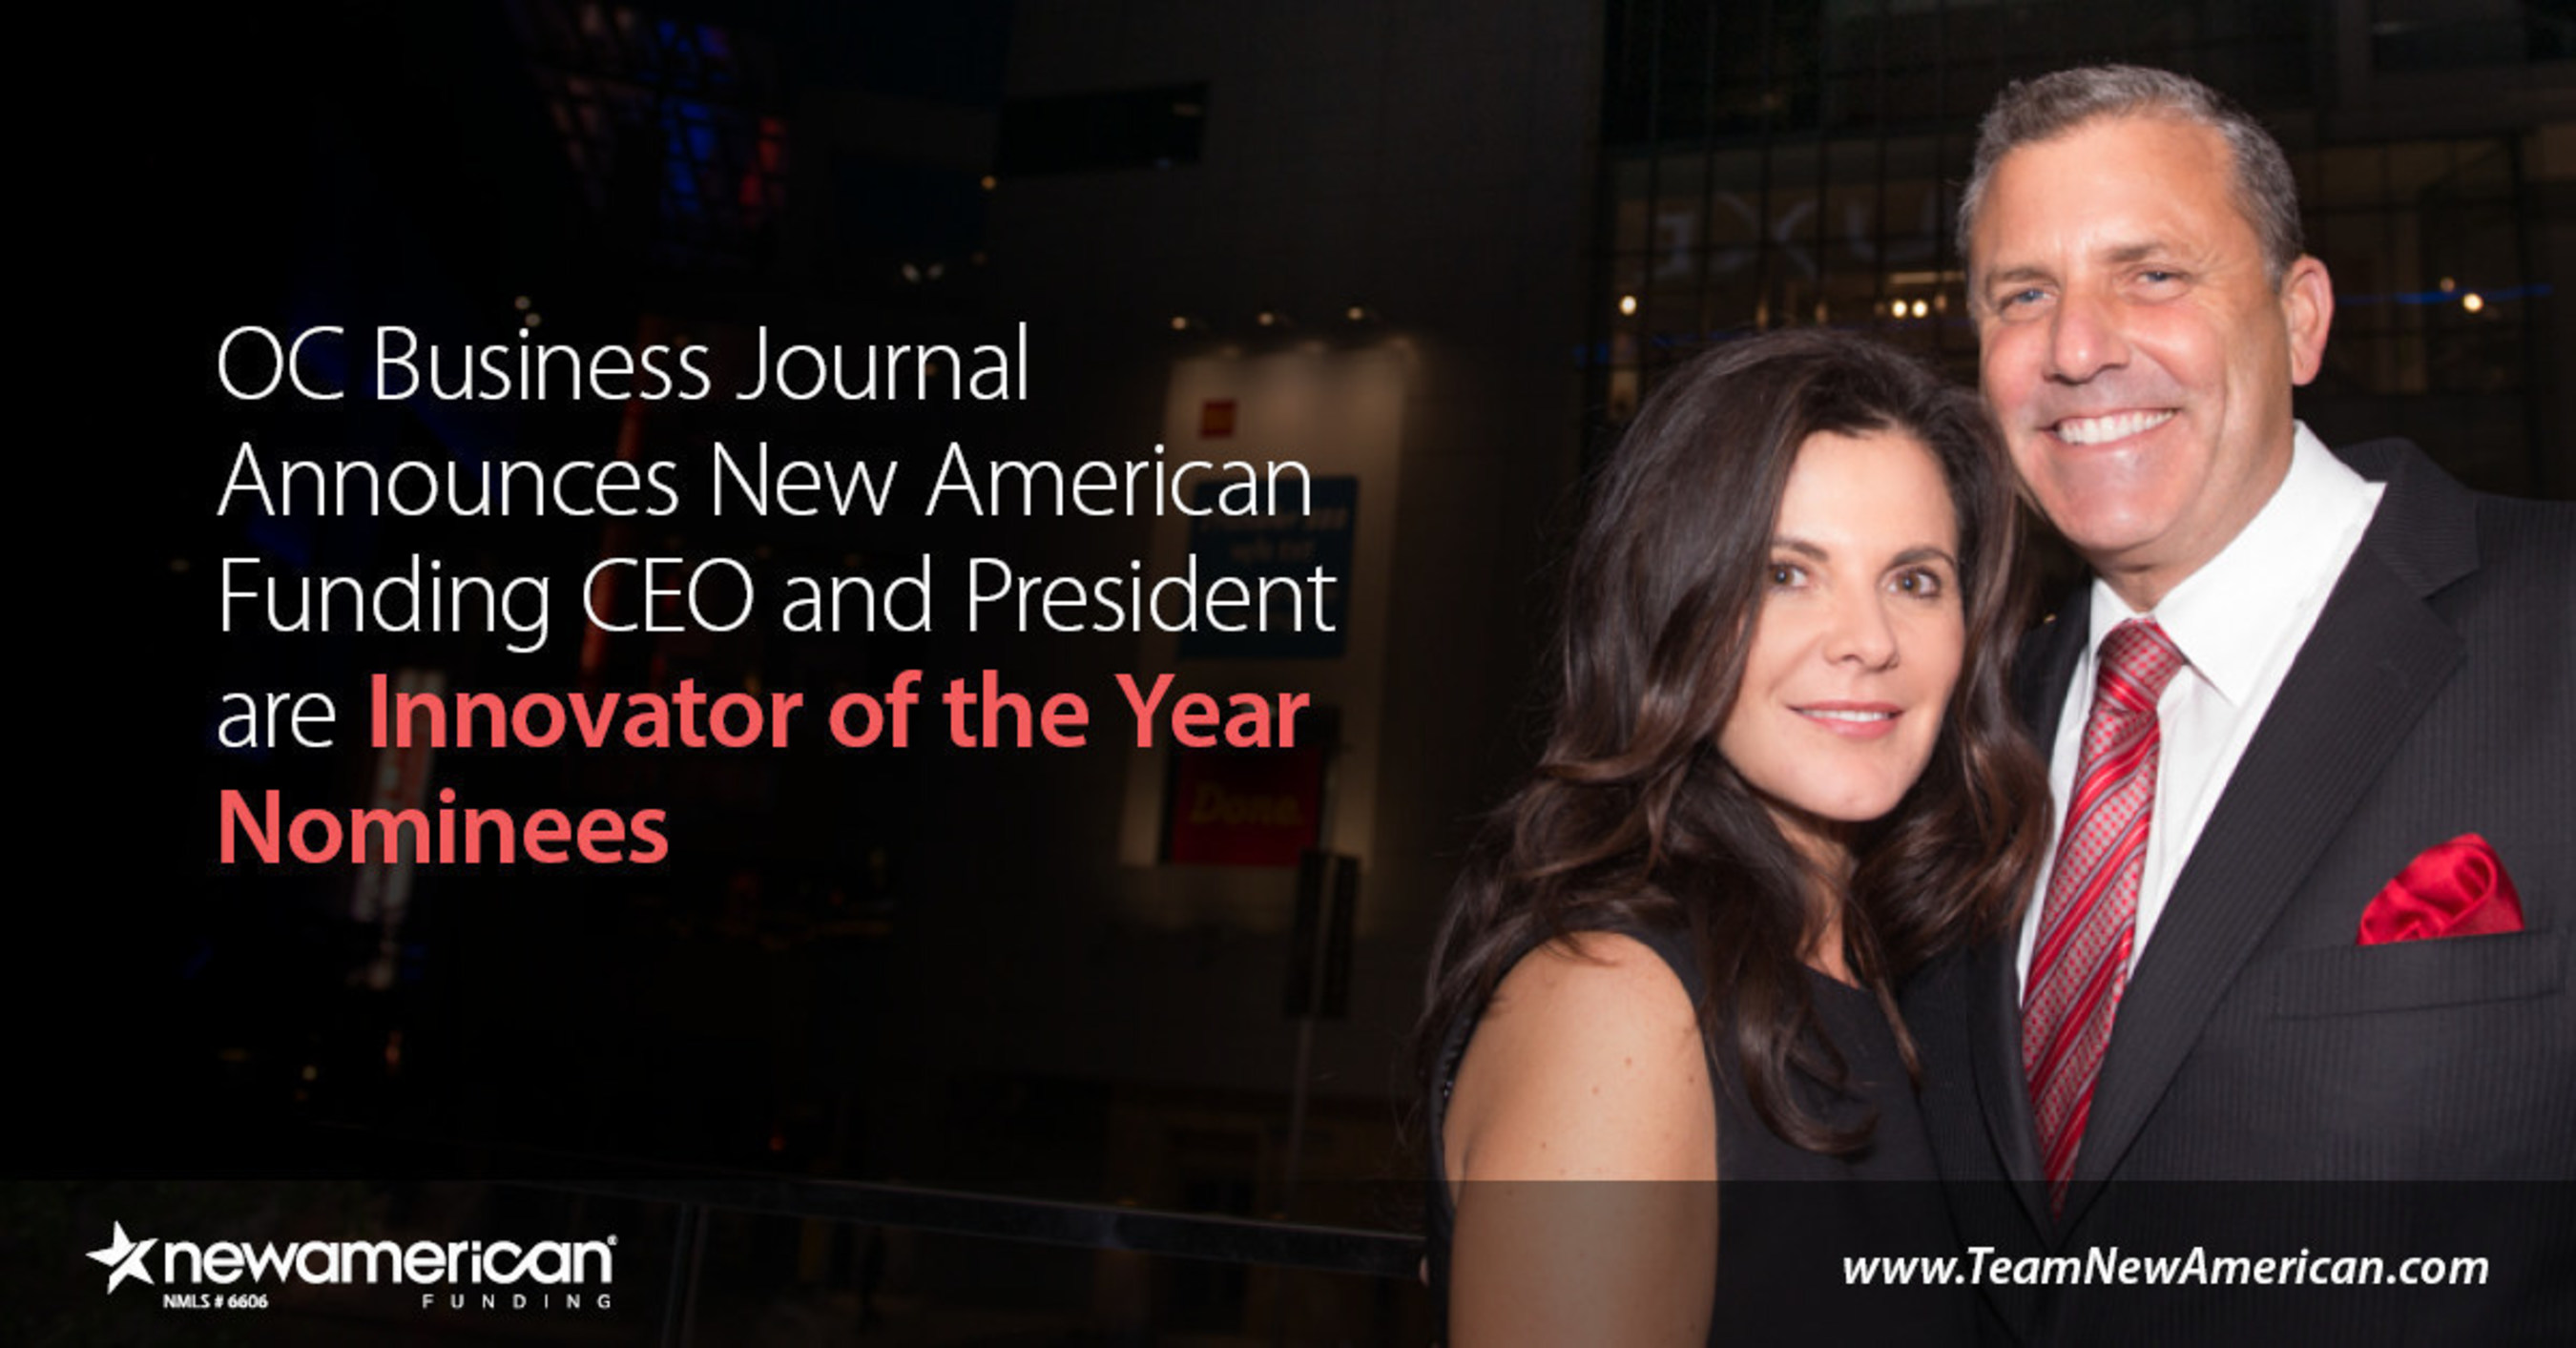 OC Business Journal Announces New American Funding CEO and President are Innovator of the Year Nominees.